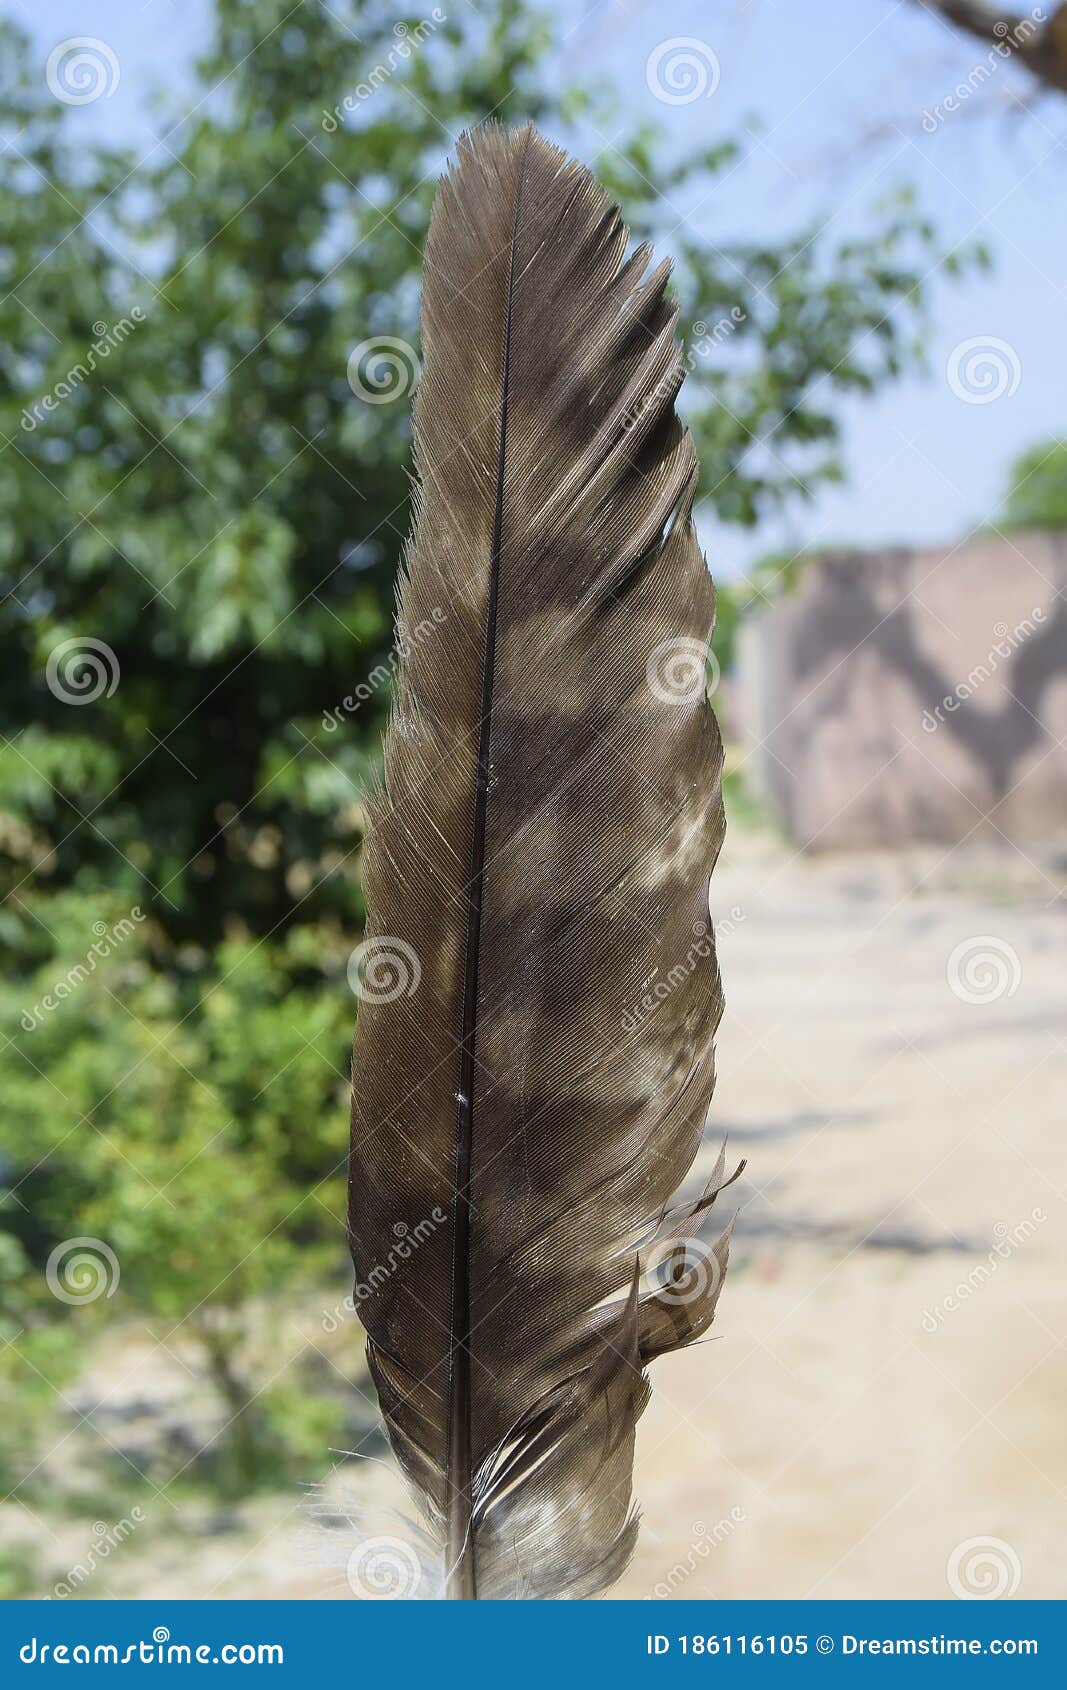 Brown and White Feather of the Bird, Beautiful Feather of the Bird in Man  Hand, Quail of the Bird, Sunlight on the Quail with the Stock Image - Image  of feathers, fluffy